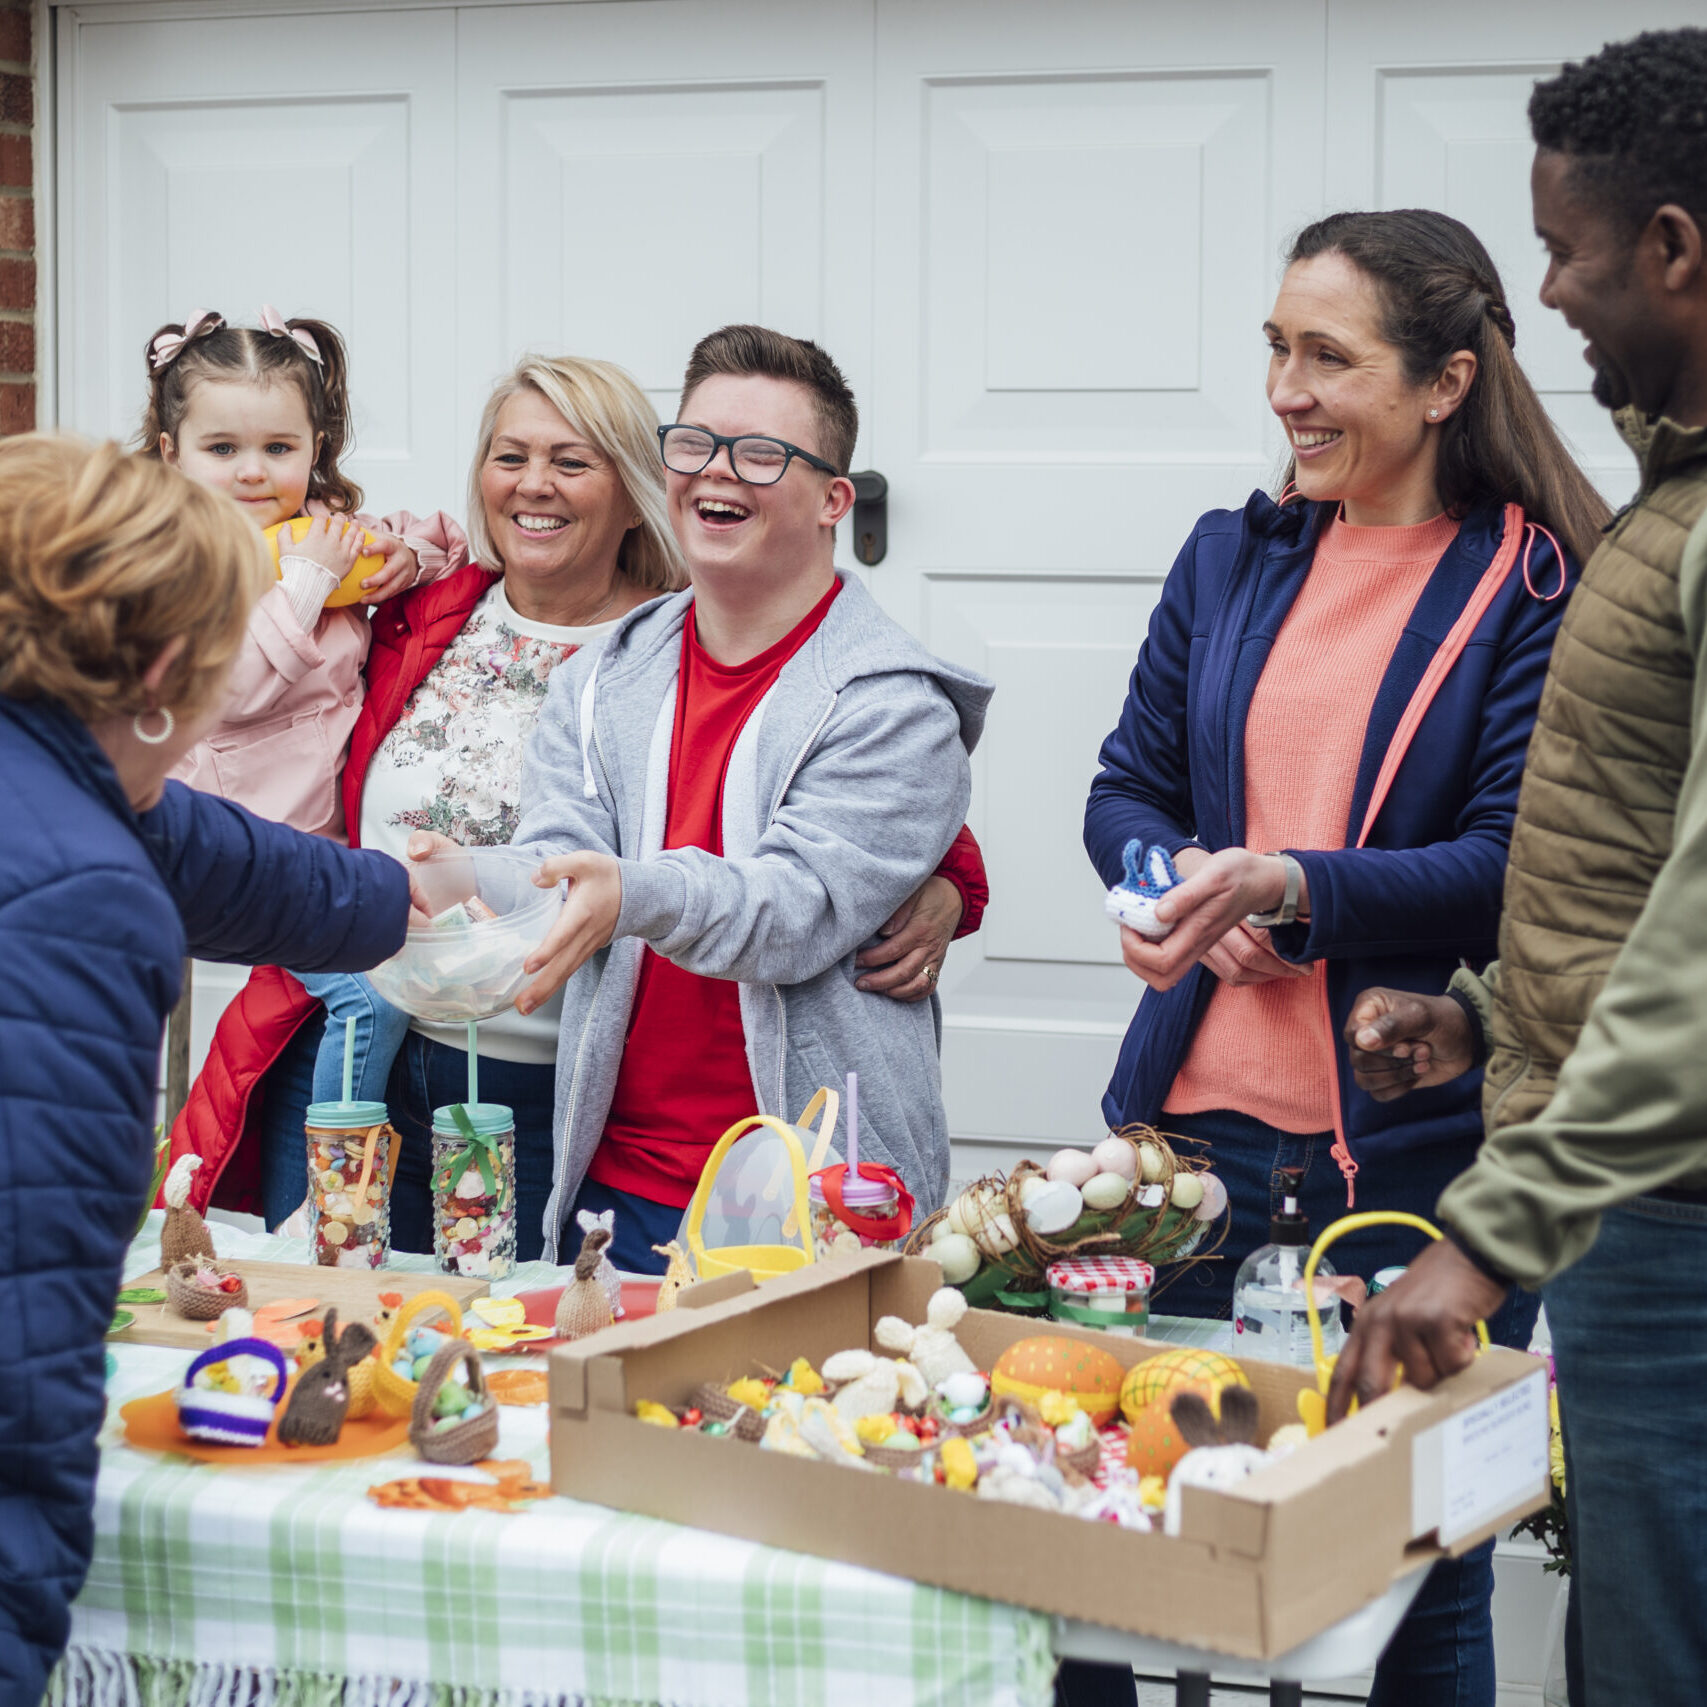 Family having an Easter yard sale in their garden in the North East of England. They have hand made easter crafts on a table and chocolate snacks. One of the sellers has down syndrome and is laughing while collecting money from a customer in a bowl.